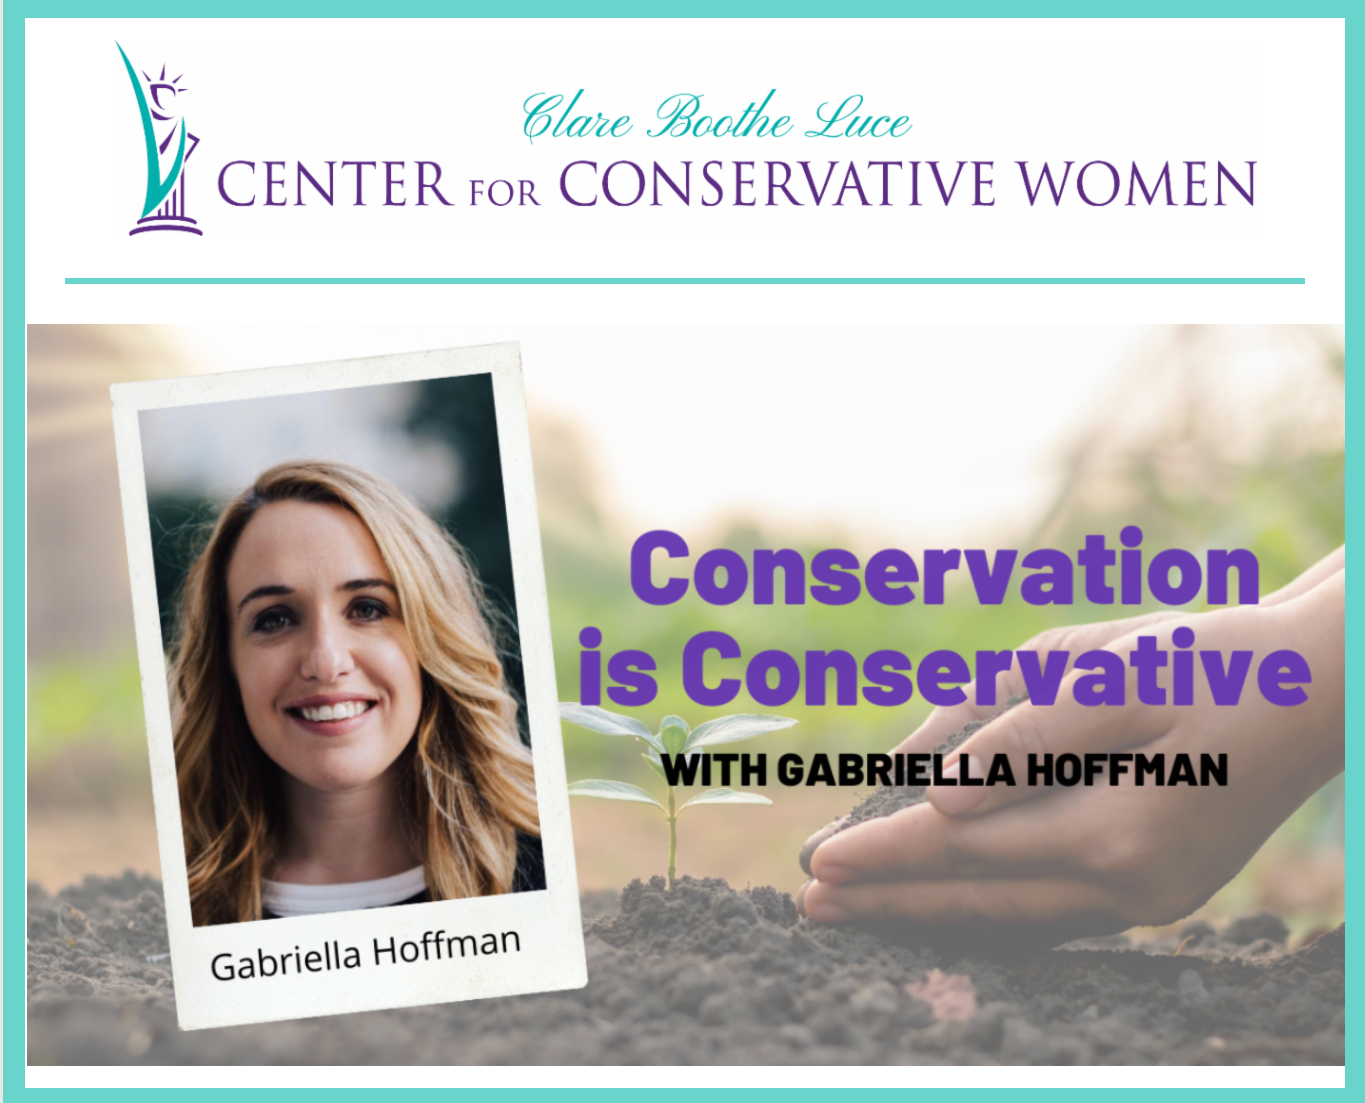 CFACT's Gabby Hoffman to present 'Conservation is Conservative' lecture on 9/24